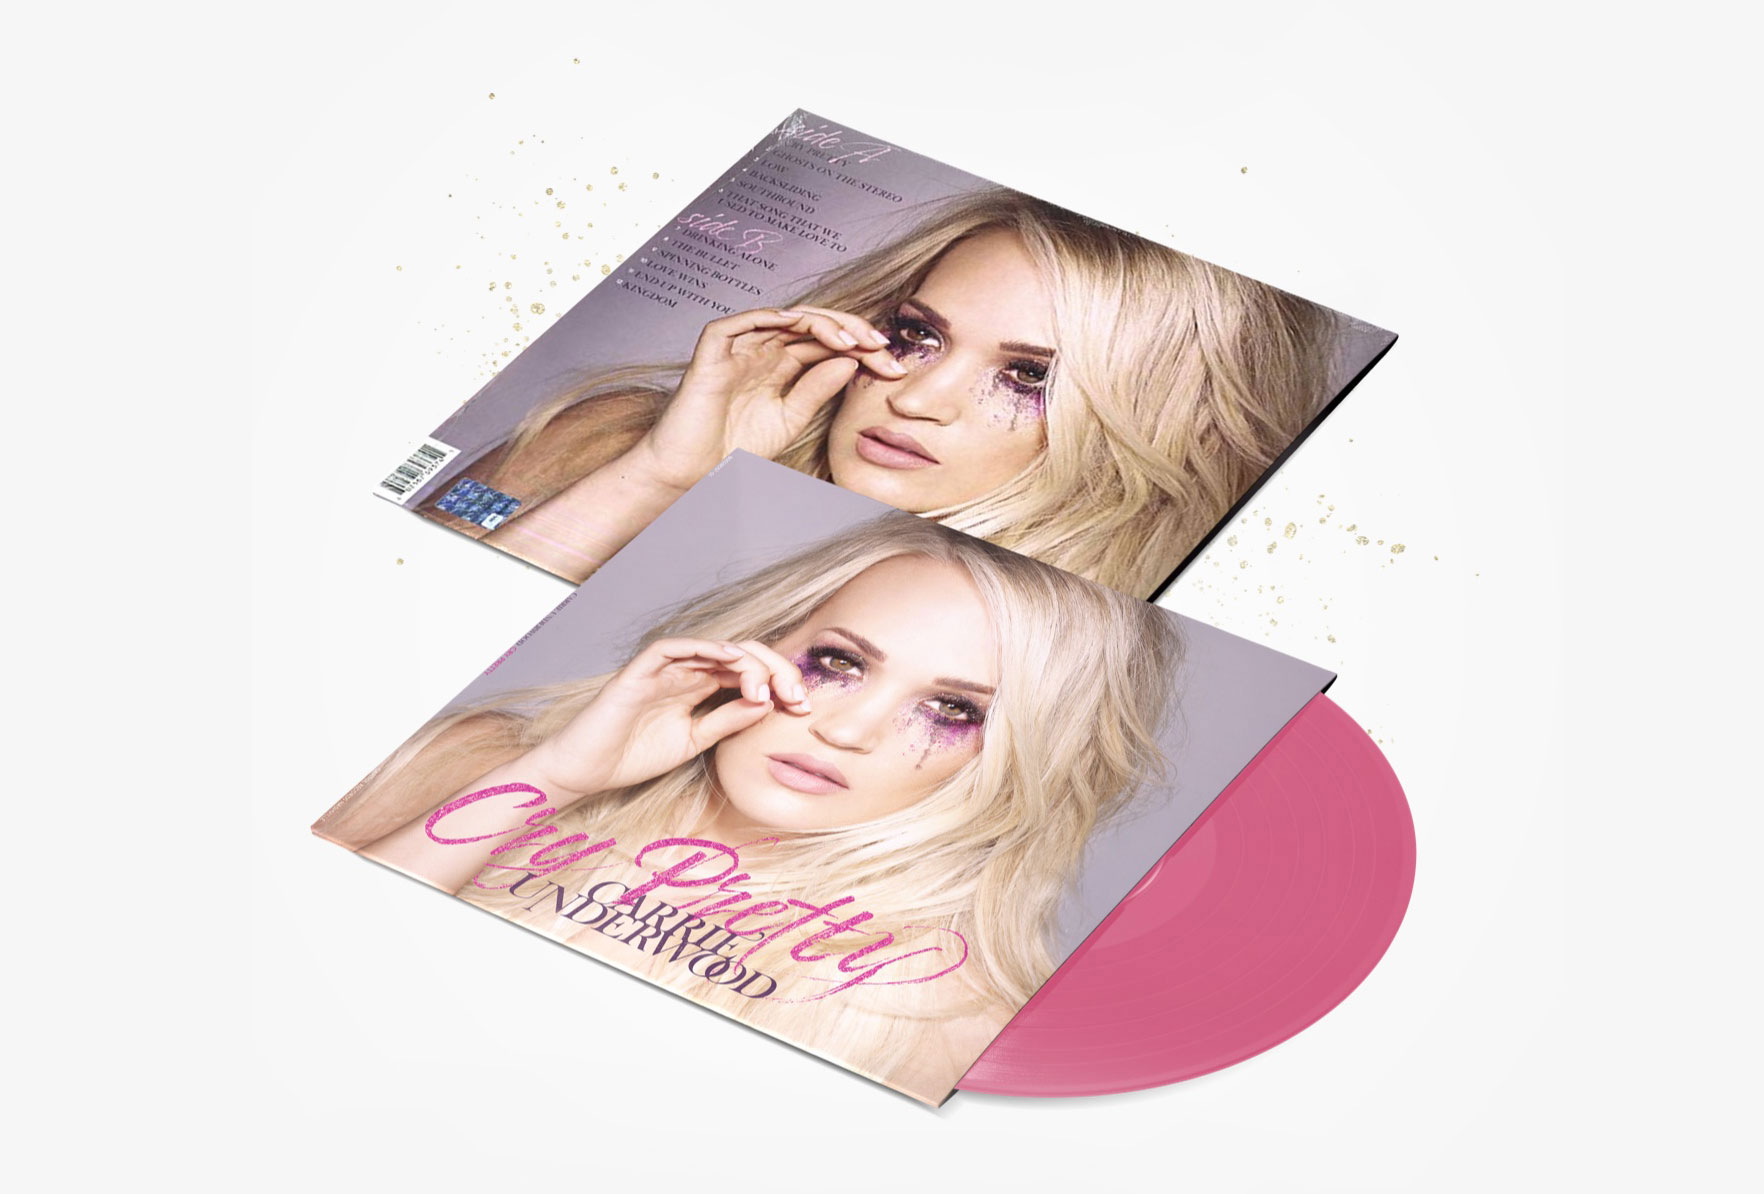 Carrie Underwood Cry Pretty Vinyl Cover Design by ST8MNT